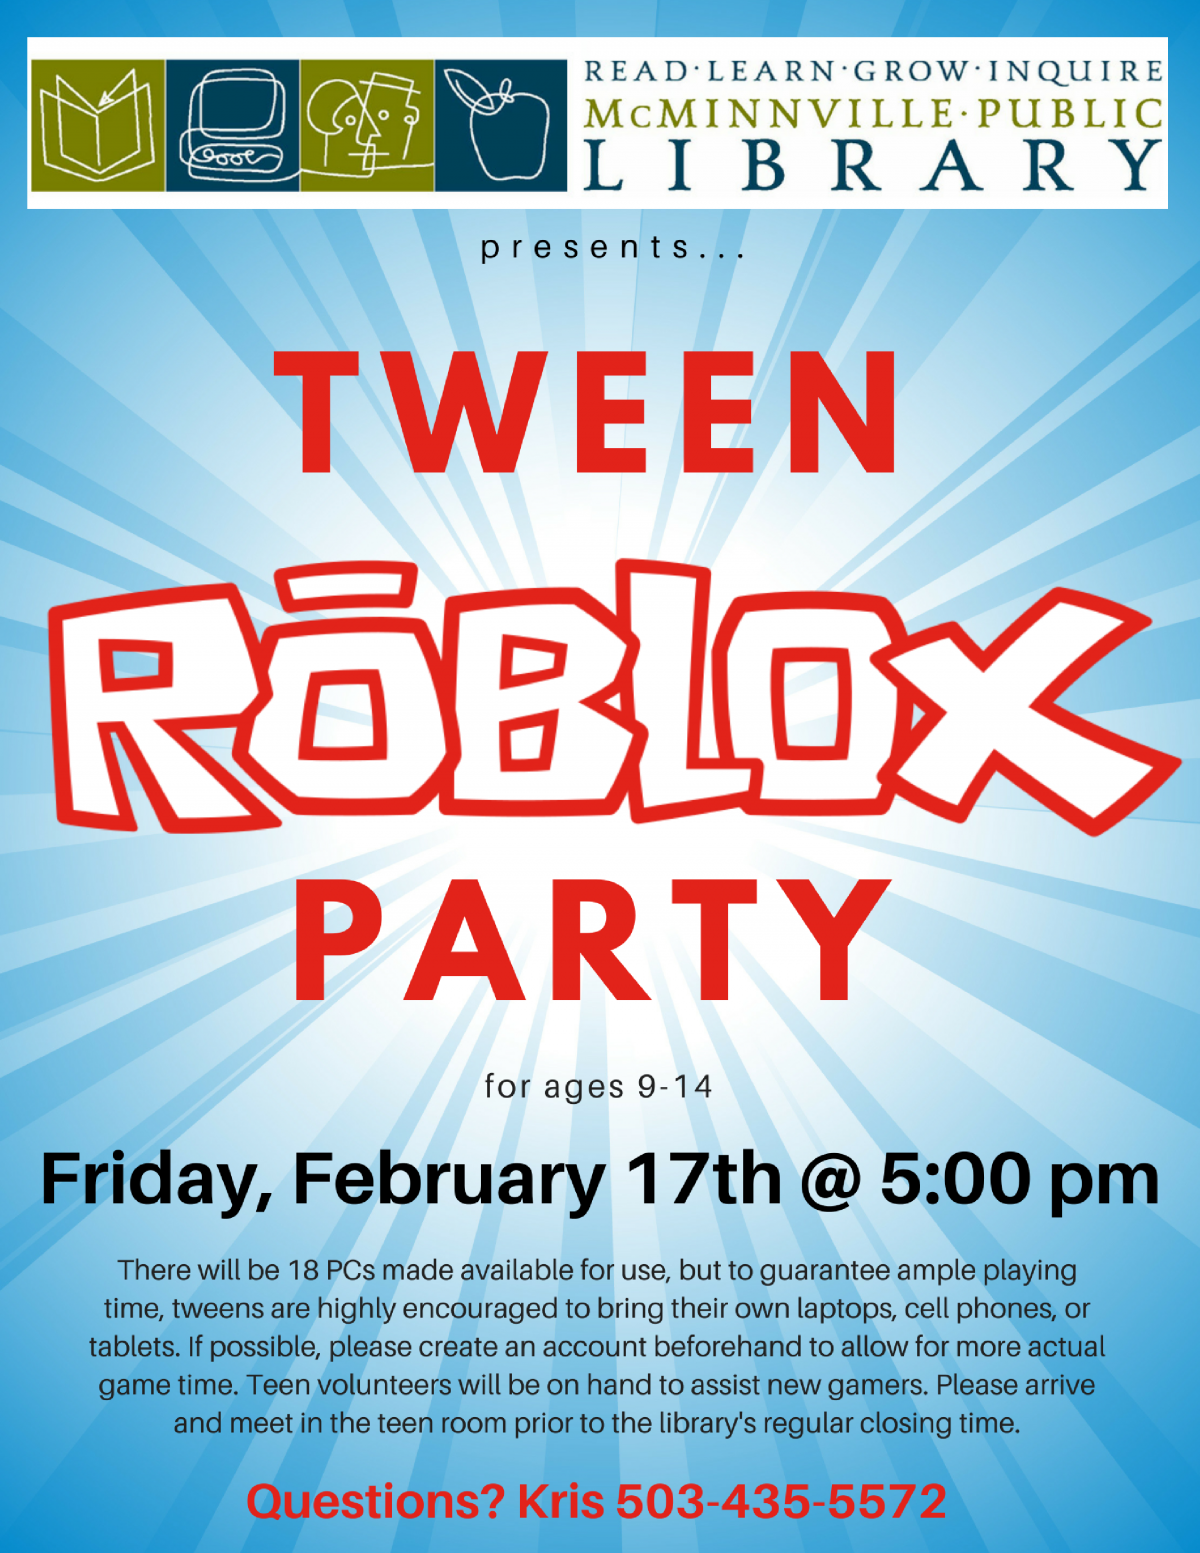 Tween Party Roblox Mcminnville Oregon - roblox library county